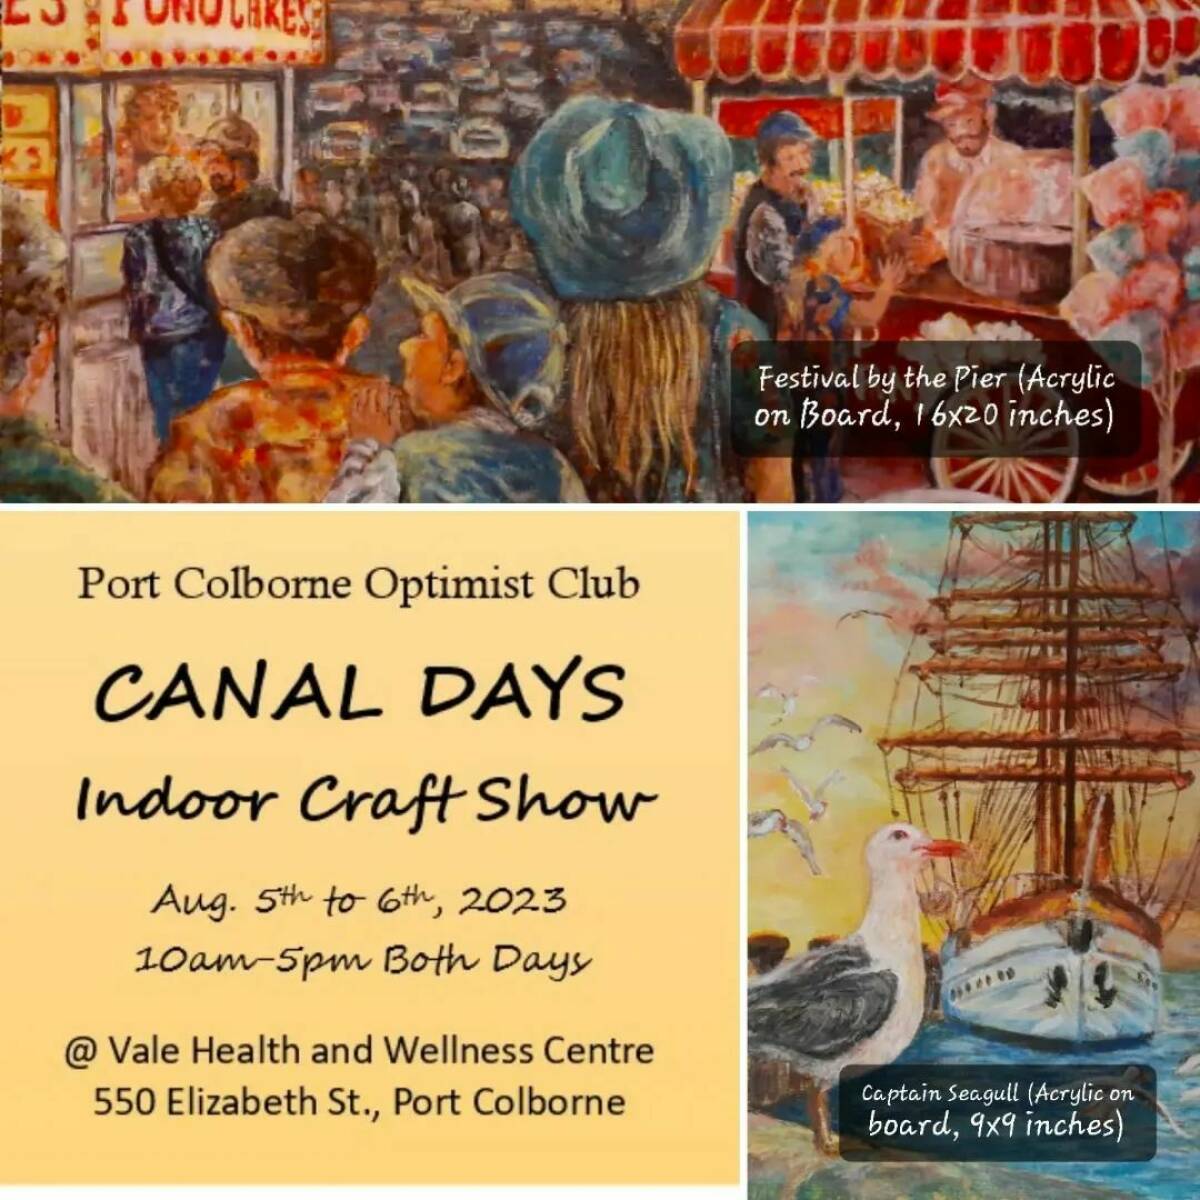 Canal Days Indoor Craft Show